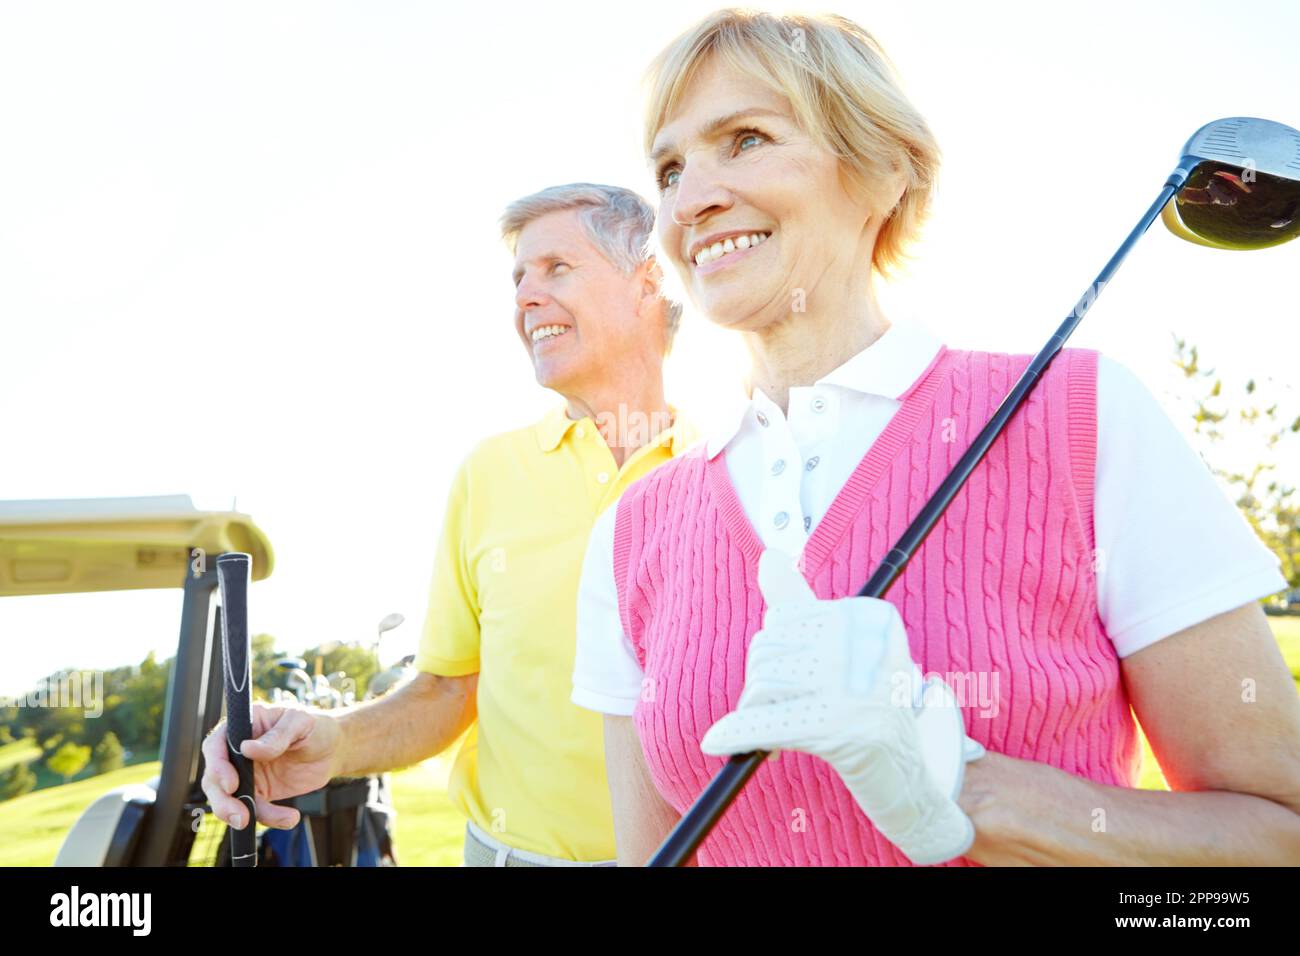 Enjoying their golf day. Attractive elderly couple with their golf clubs over their shoulders. Stock Photo